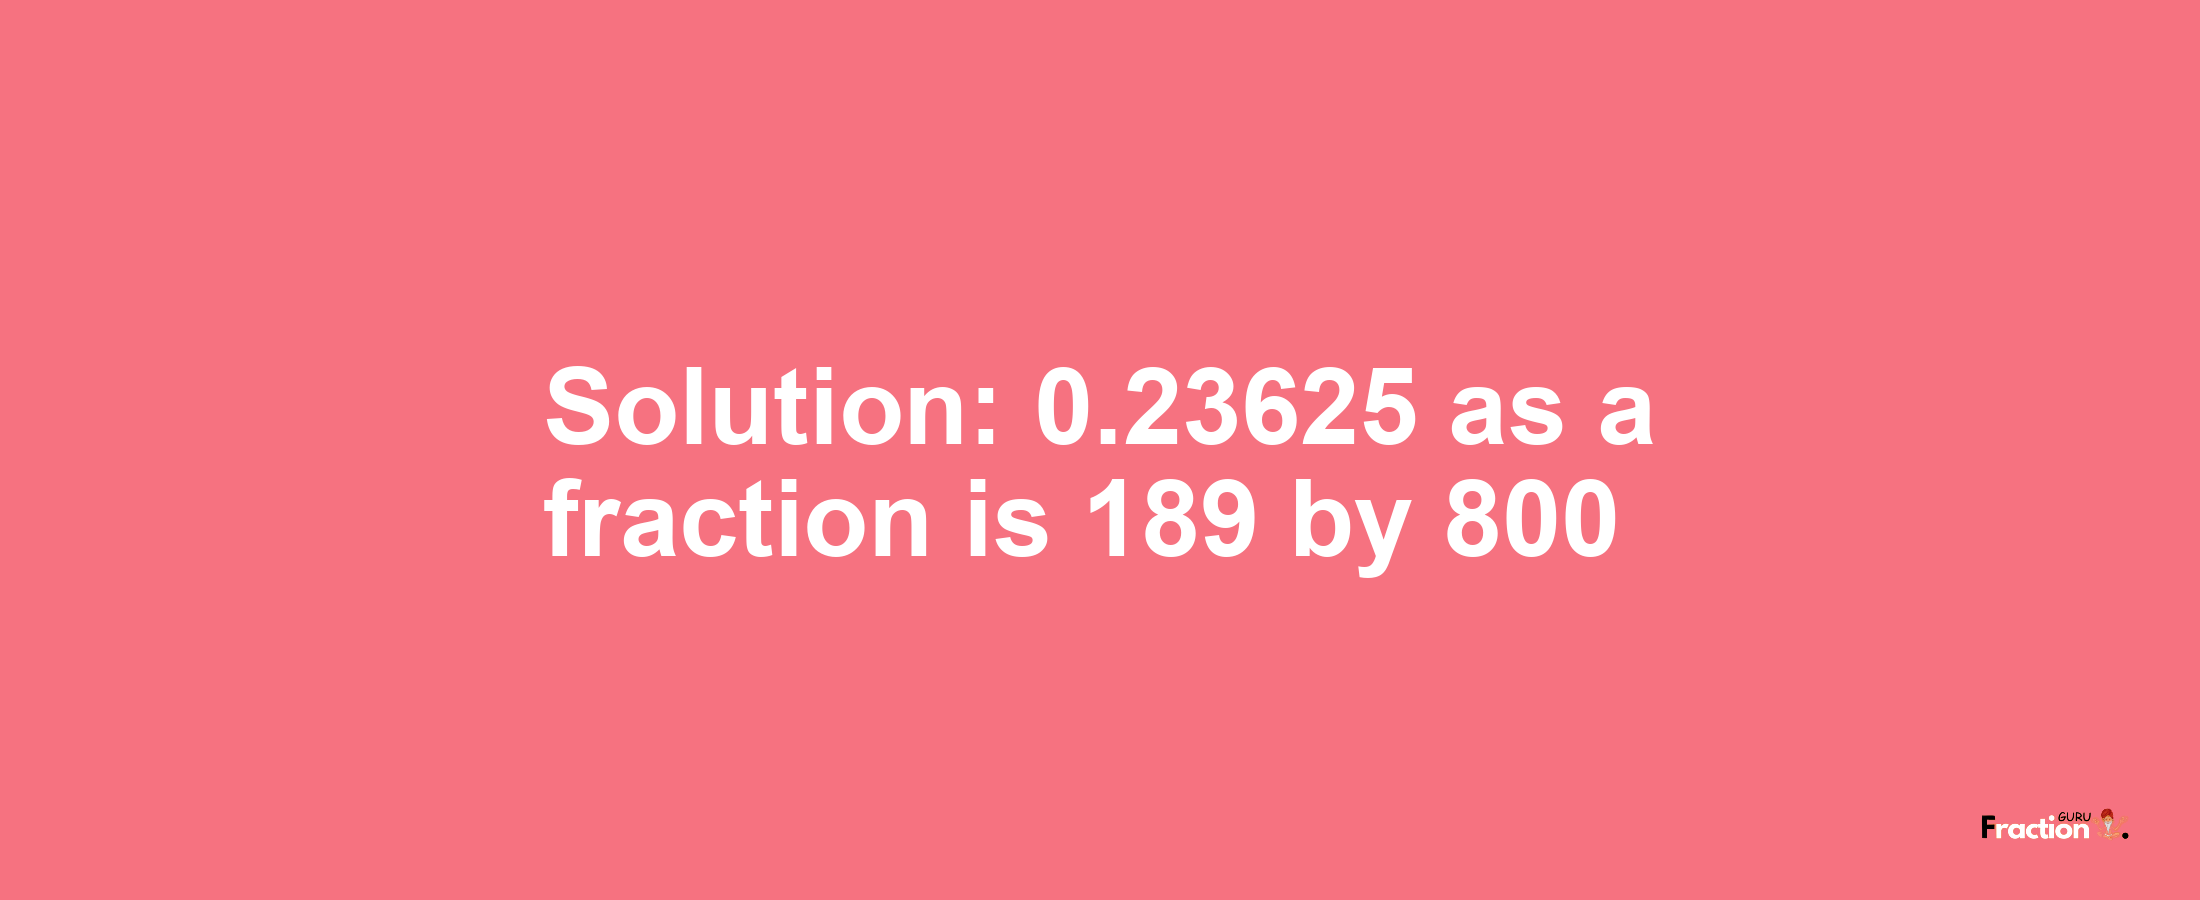 Solution:0.23625 as a fraction is 189/800